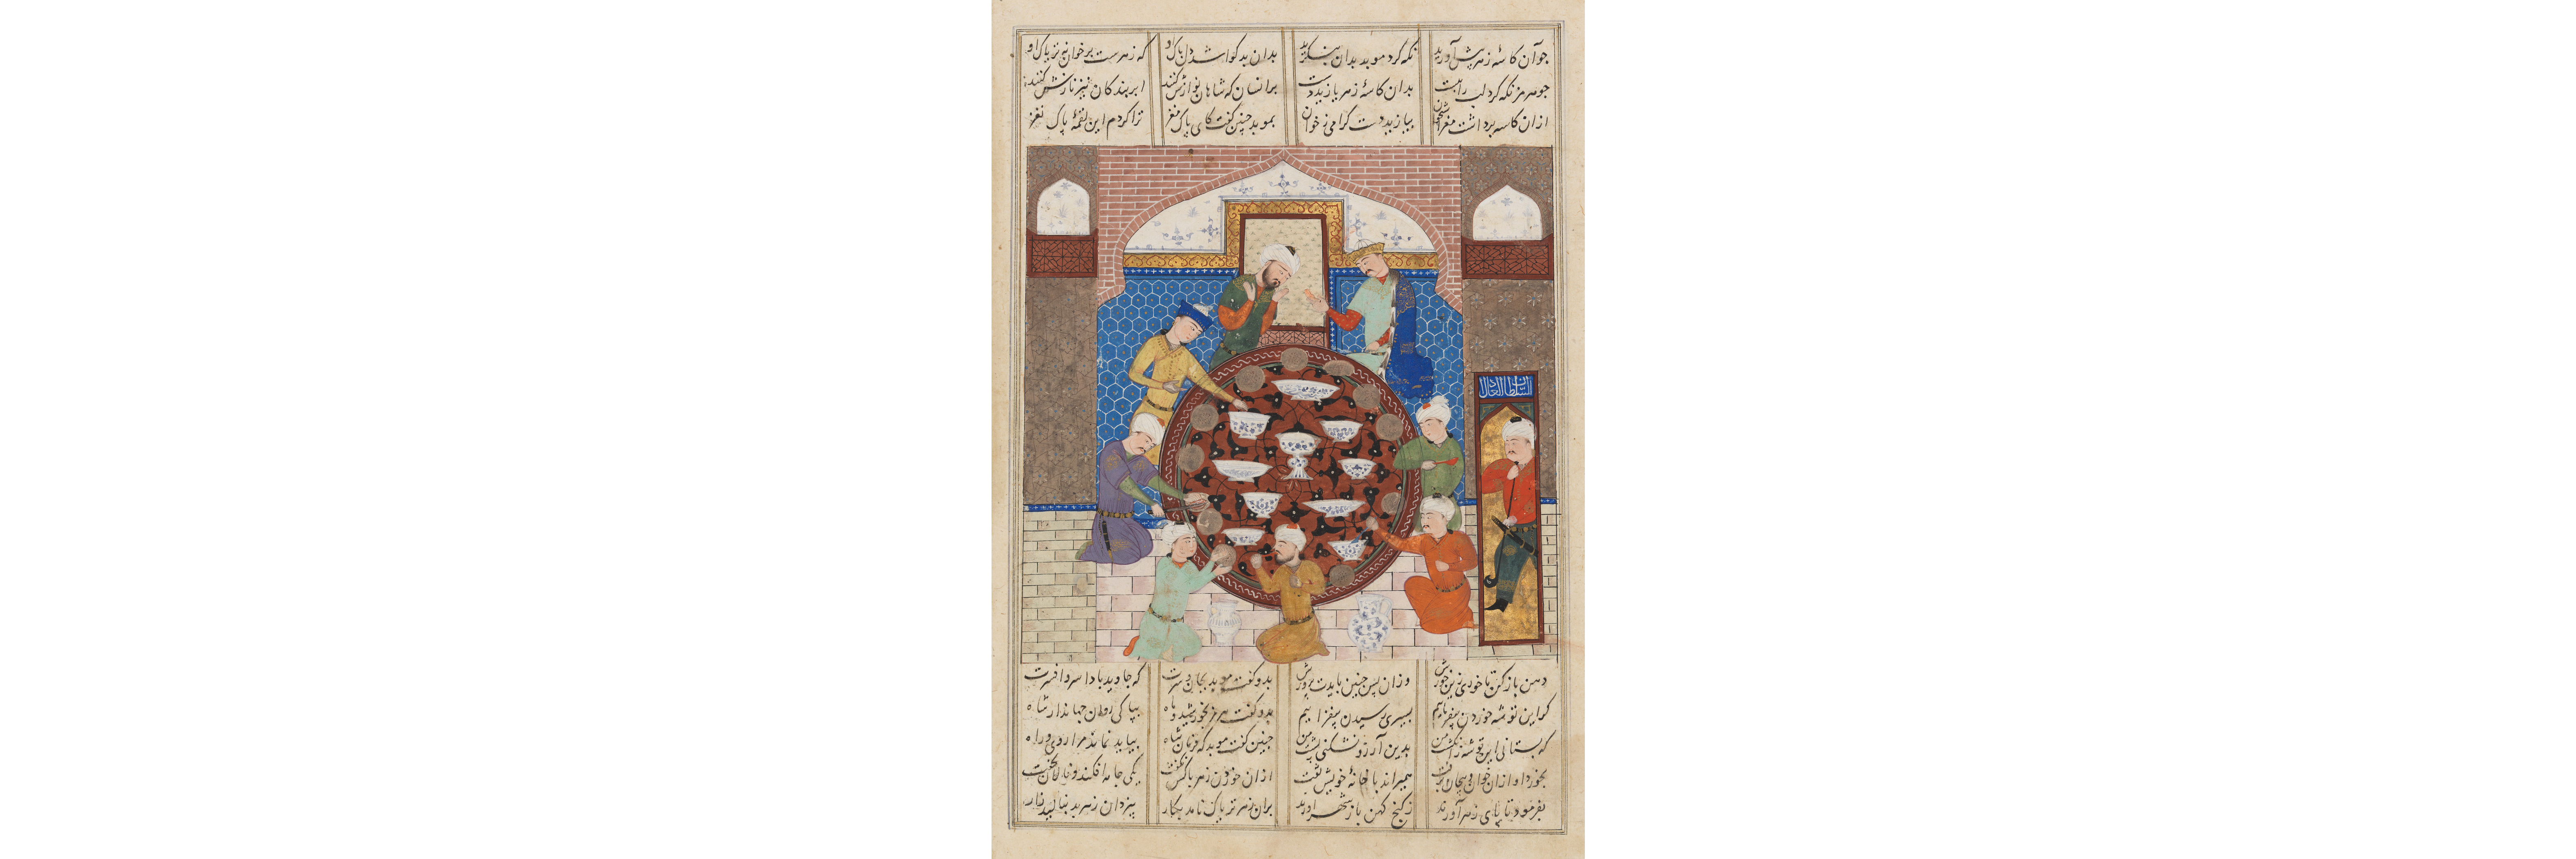 Hormuz Forces His High Priest to Eat Poisoned Food, Page from a Manuscript of the Shahnama (Book of Kings) of Firdawsi, Iran, Shiraz, c. 1485-1495, Los Angeles County Museum of Art, The Nasli M. Heeramaneck Collection, gift of Joan Palevsky, photo © Museum Associates / LACMA